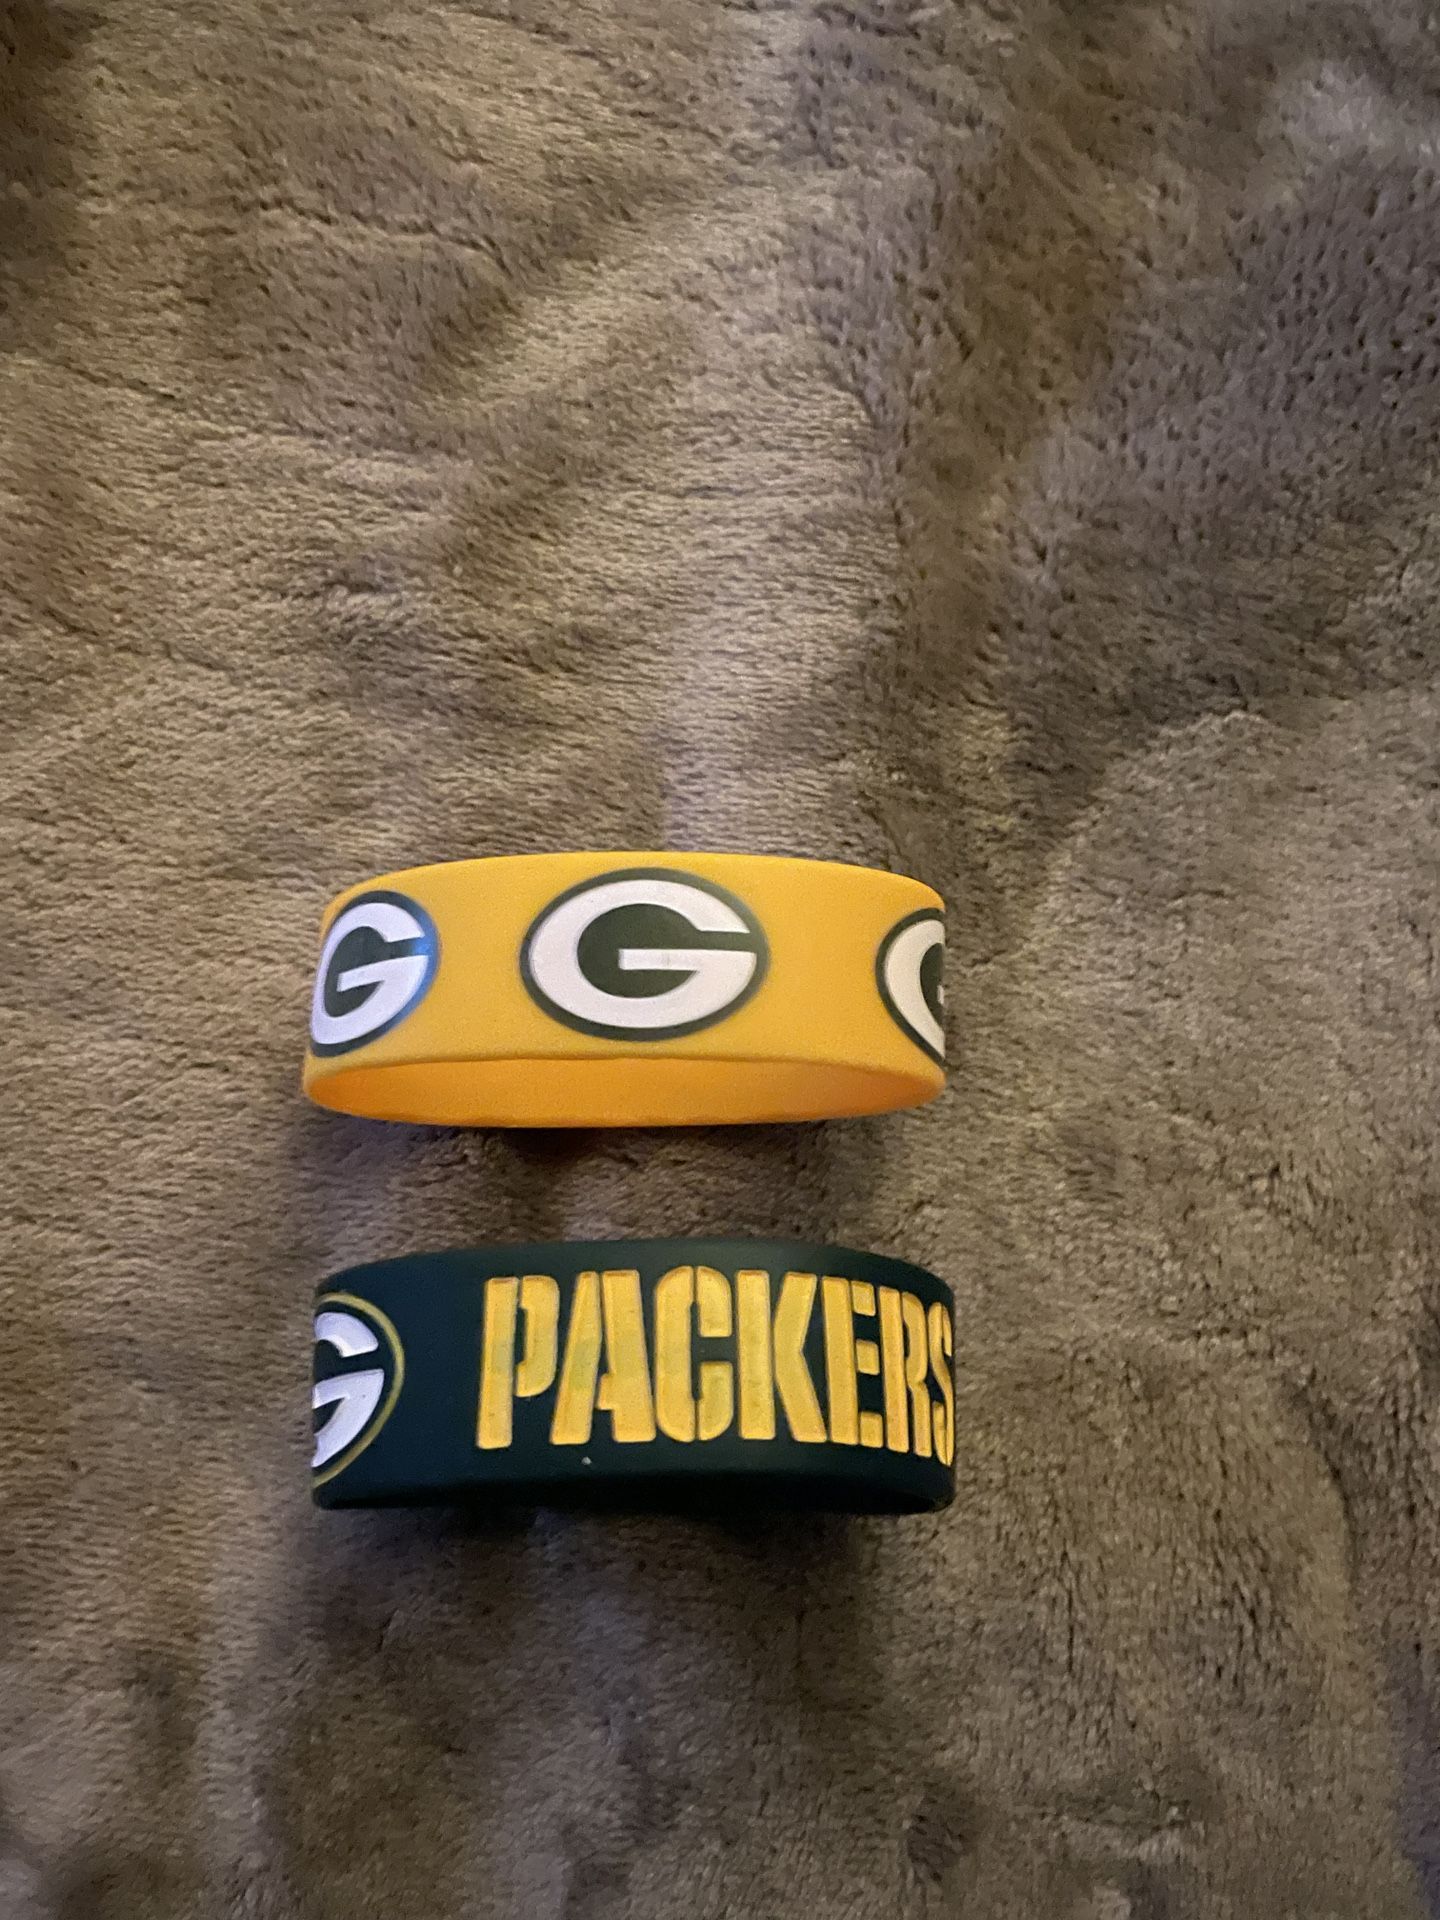 Green Bay Packers NFL Green and Gold Bracelet Set! NEW!